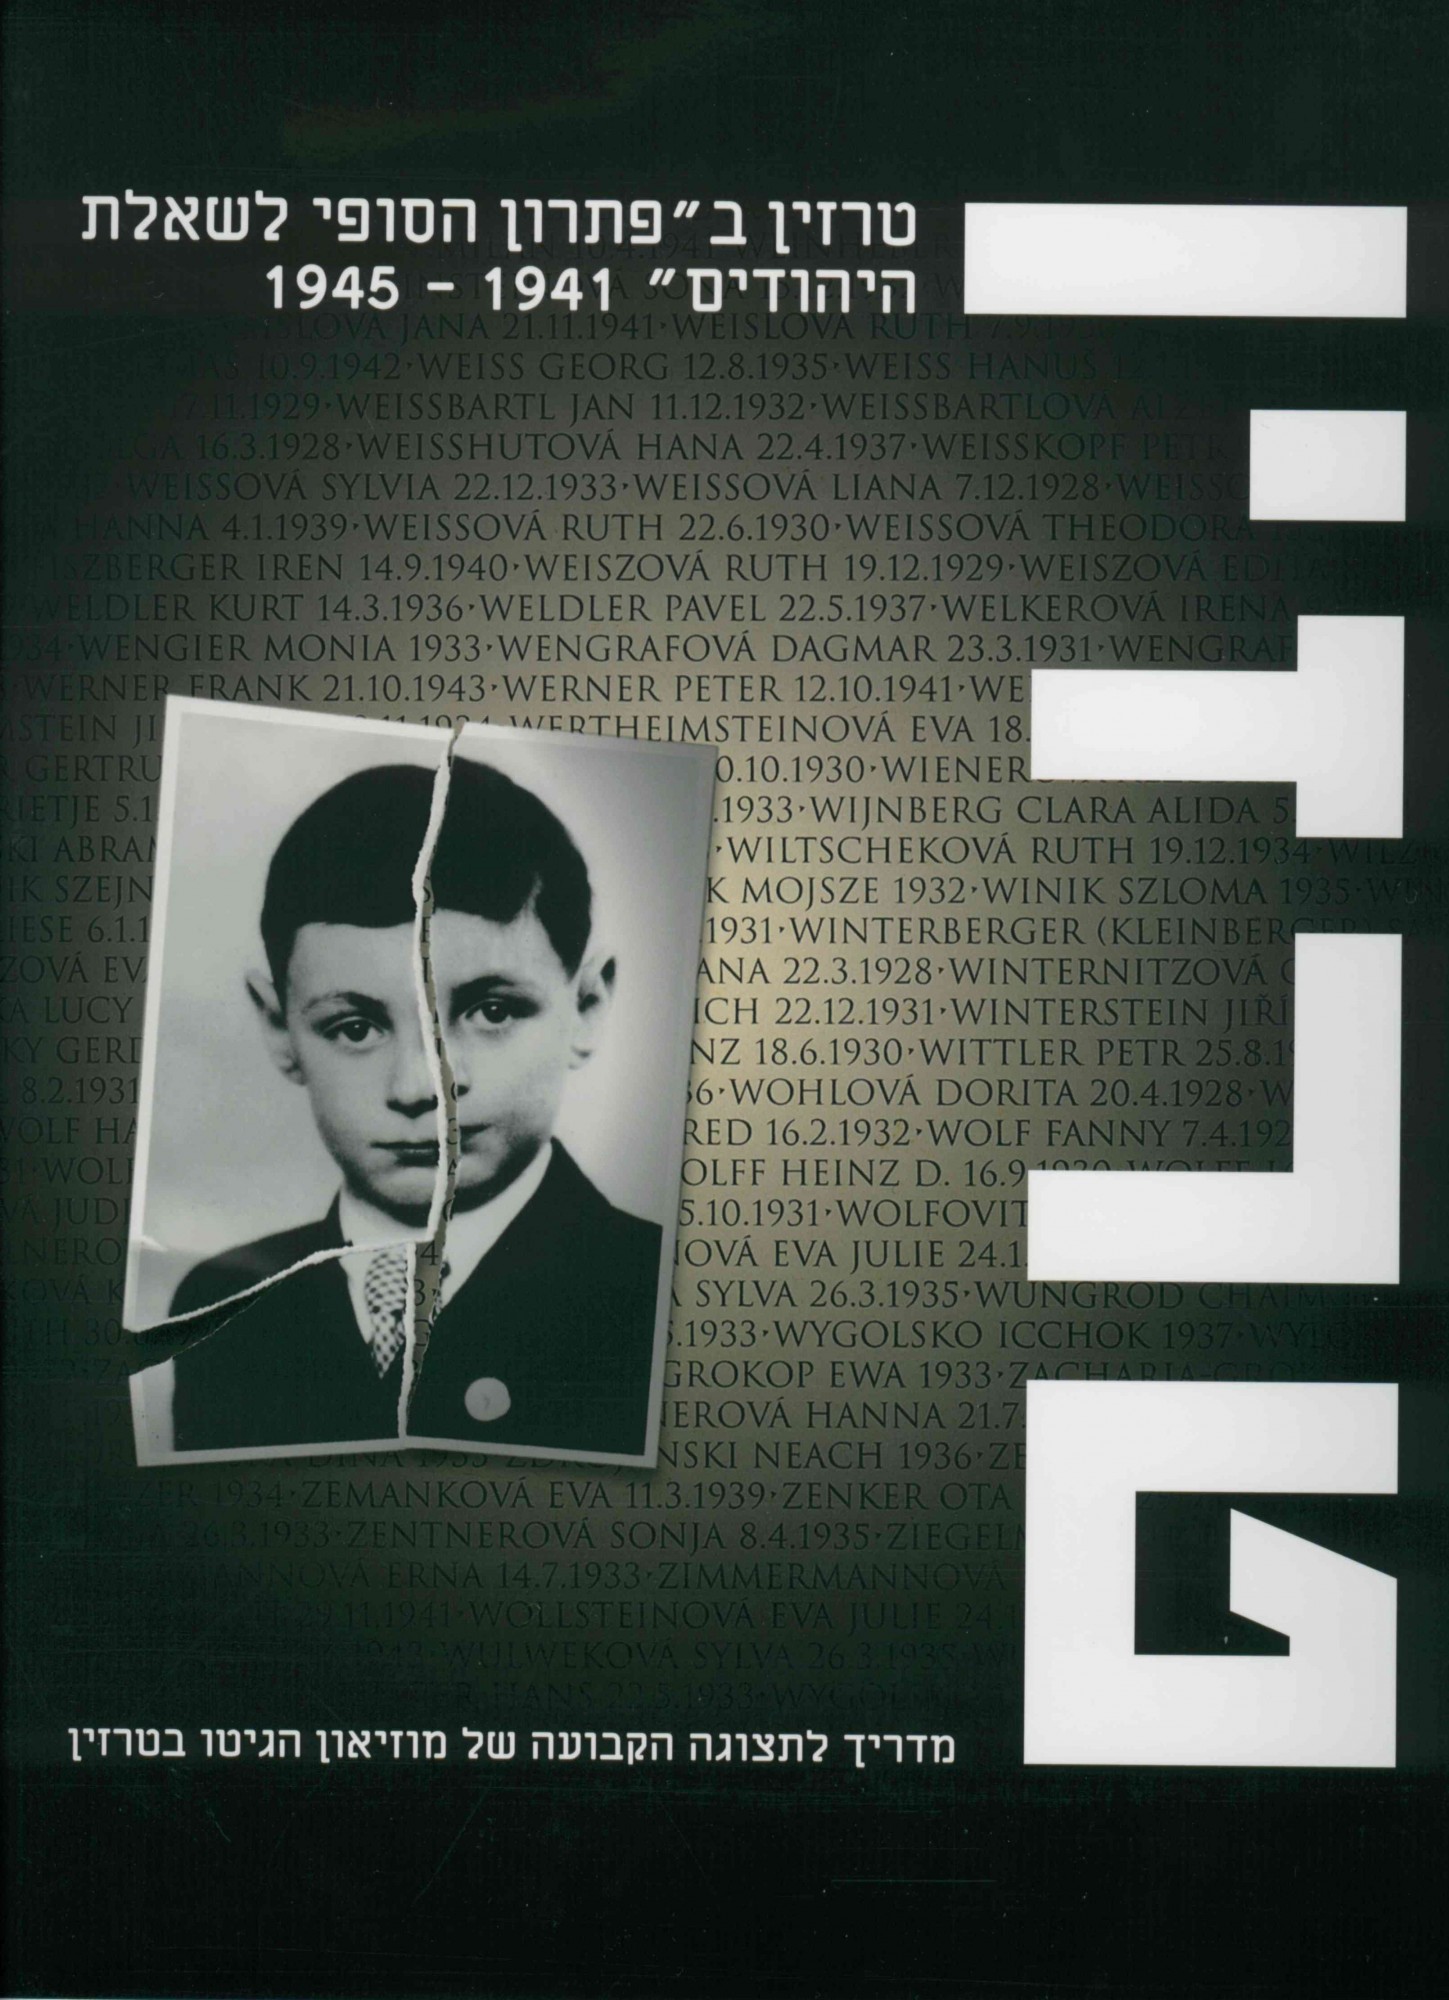 Terezín in the "final solution of the Jewish question" 1941-1945 (Hebrew version)